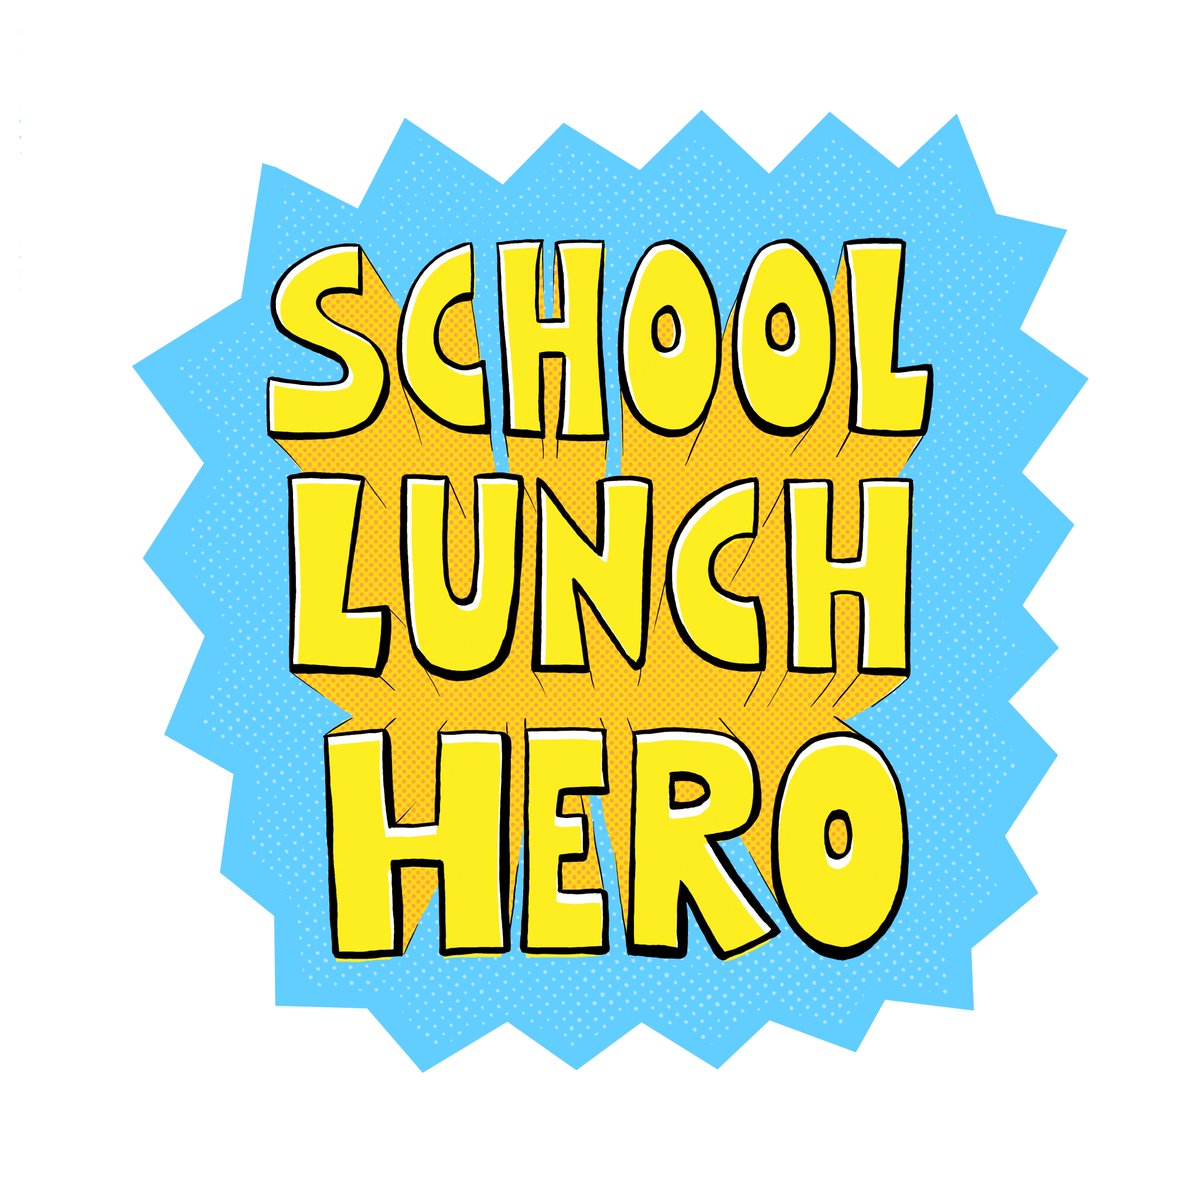 May 3 is School Lunch Hero Day. We are blessed with heroes who make sure our children have access to nutritious meals. Thank you to all of our lunch heroes for supporting the students of IWCS.